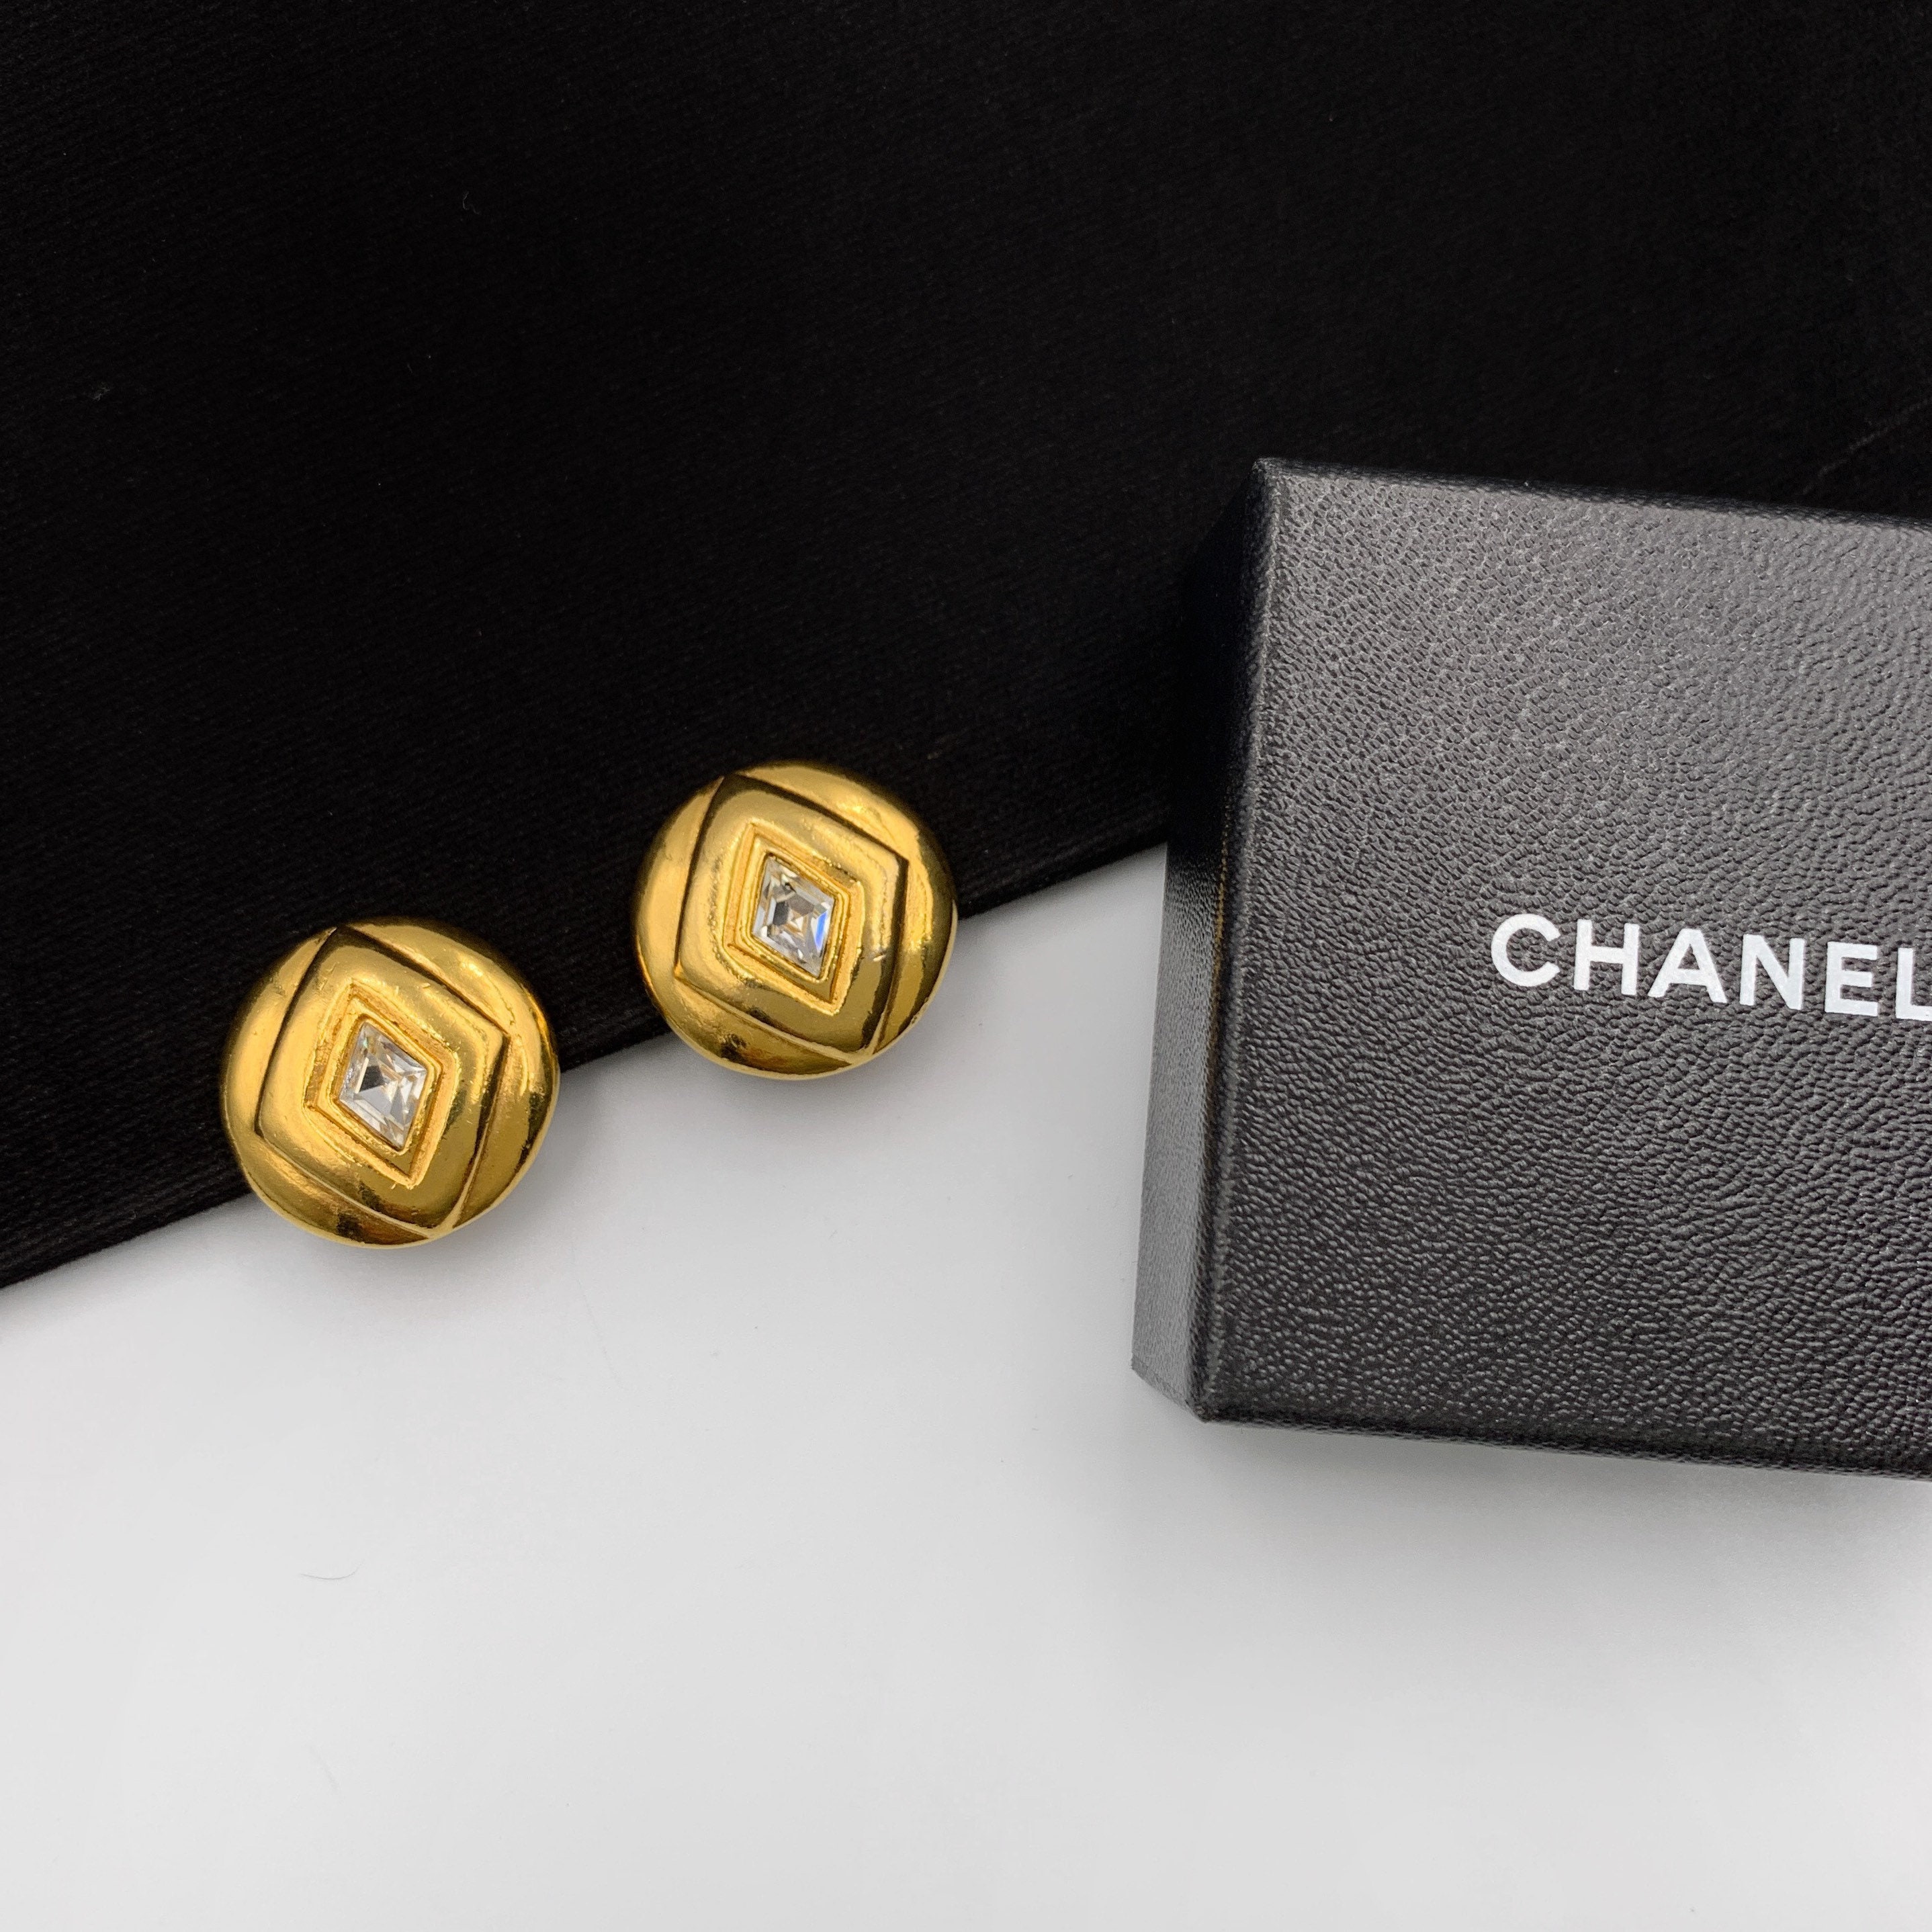 CHANEL, Jewelry, New 23p Chanel Silver Crystal Cc Logo Studs Earrings  Brand New Wtag